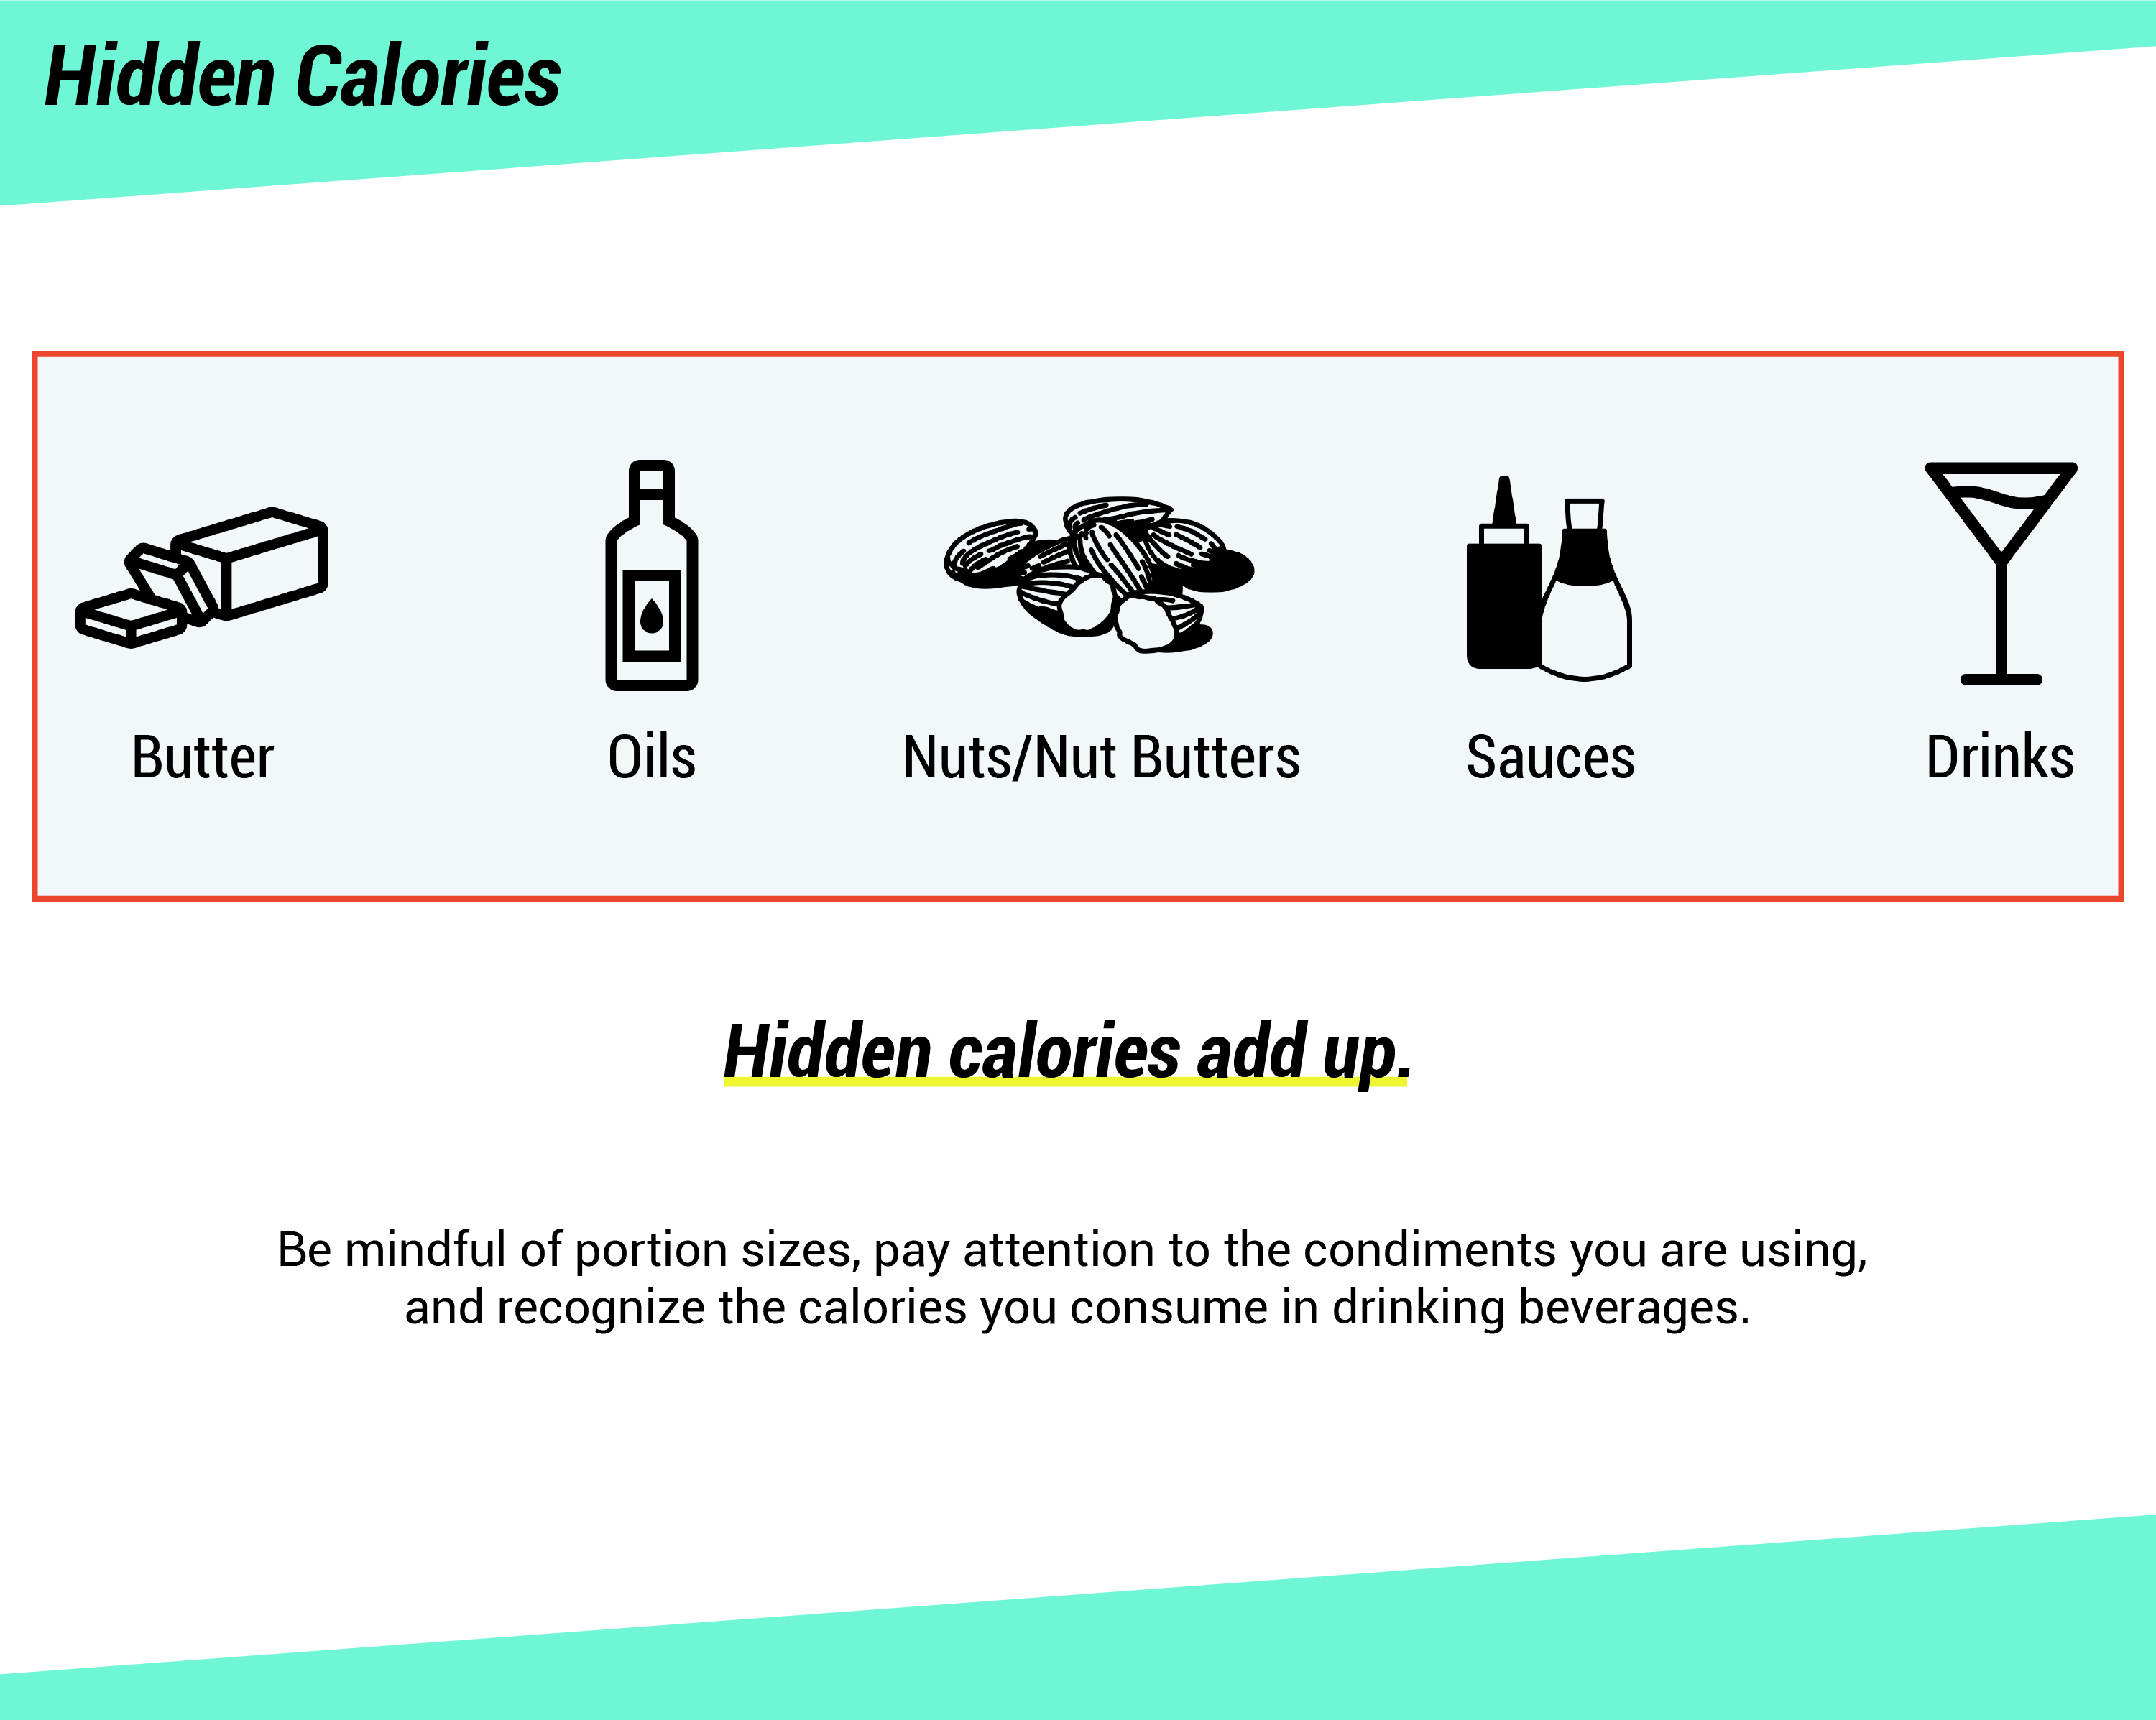 A graphic showing foods with hidden calories: butter, oils, nuts & nut butters, sauces, drinks